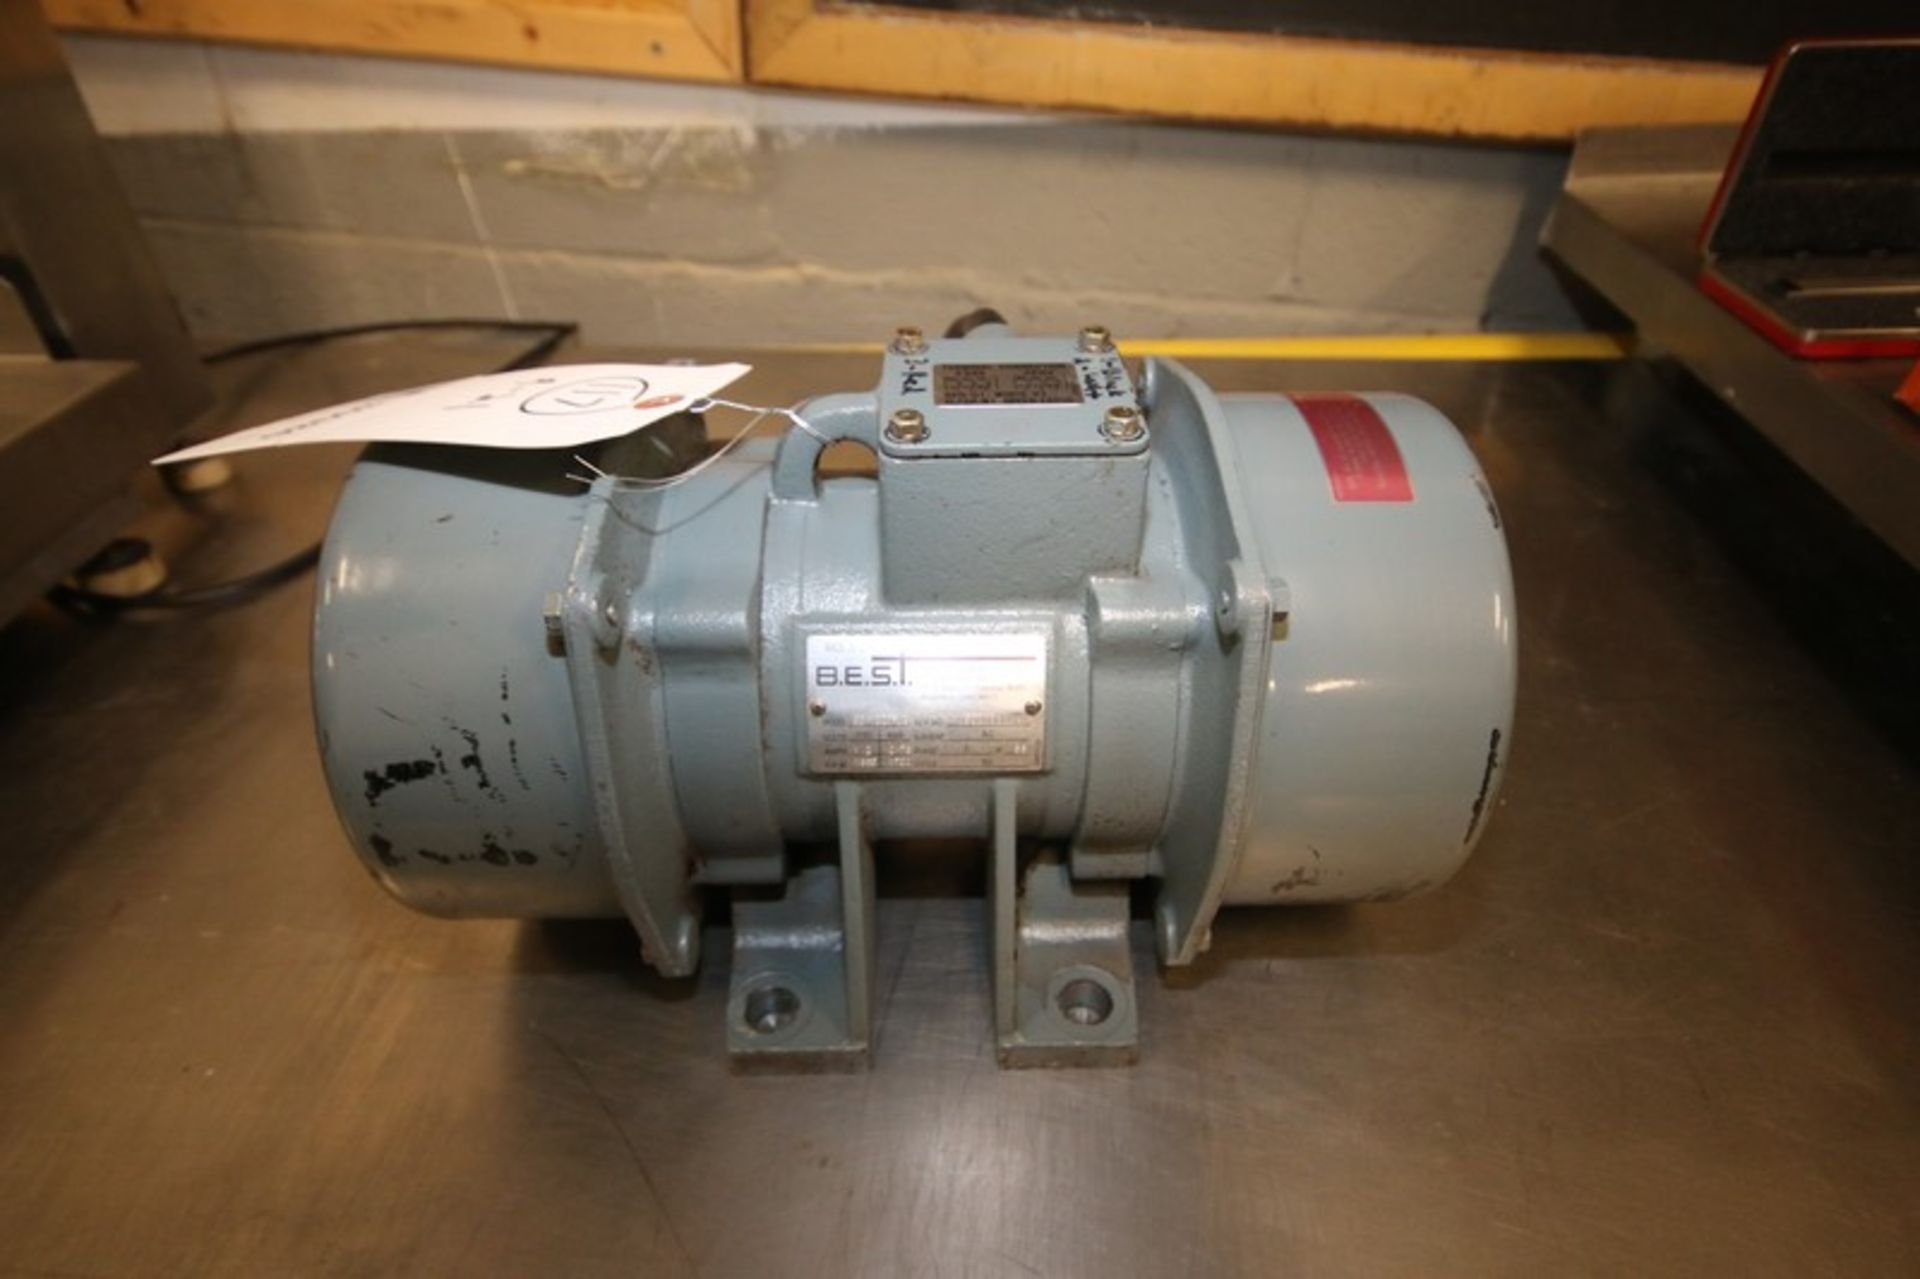 (2) Best Vibrator, Model BE-1320-4B, 230/460V(INV#80986)(Located @ the MDG Auction Showroom in Pgh.,